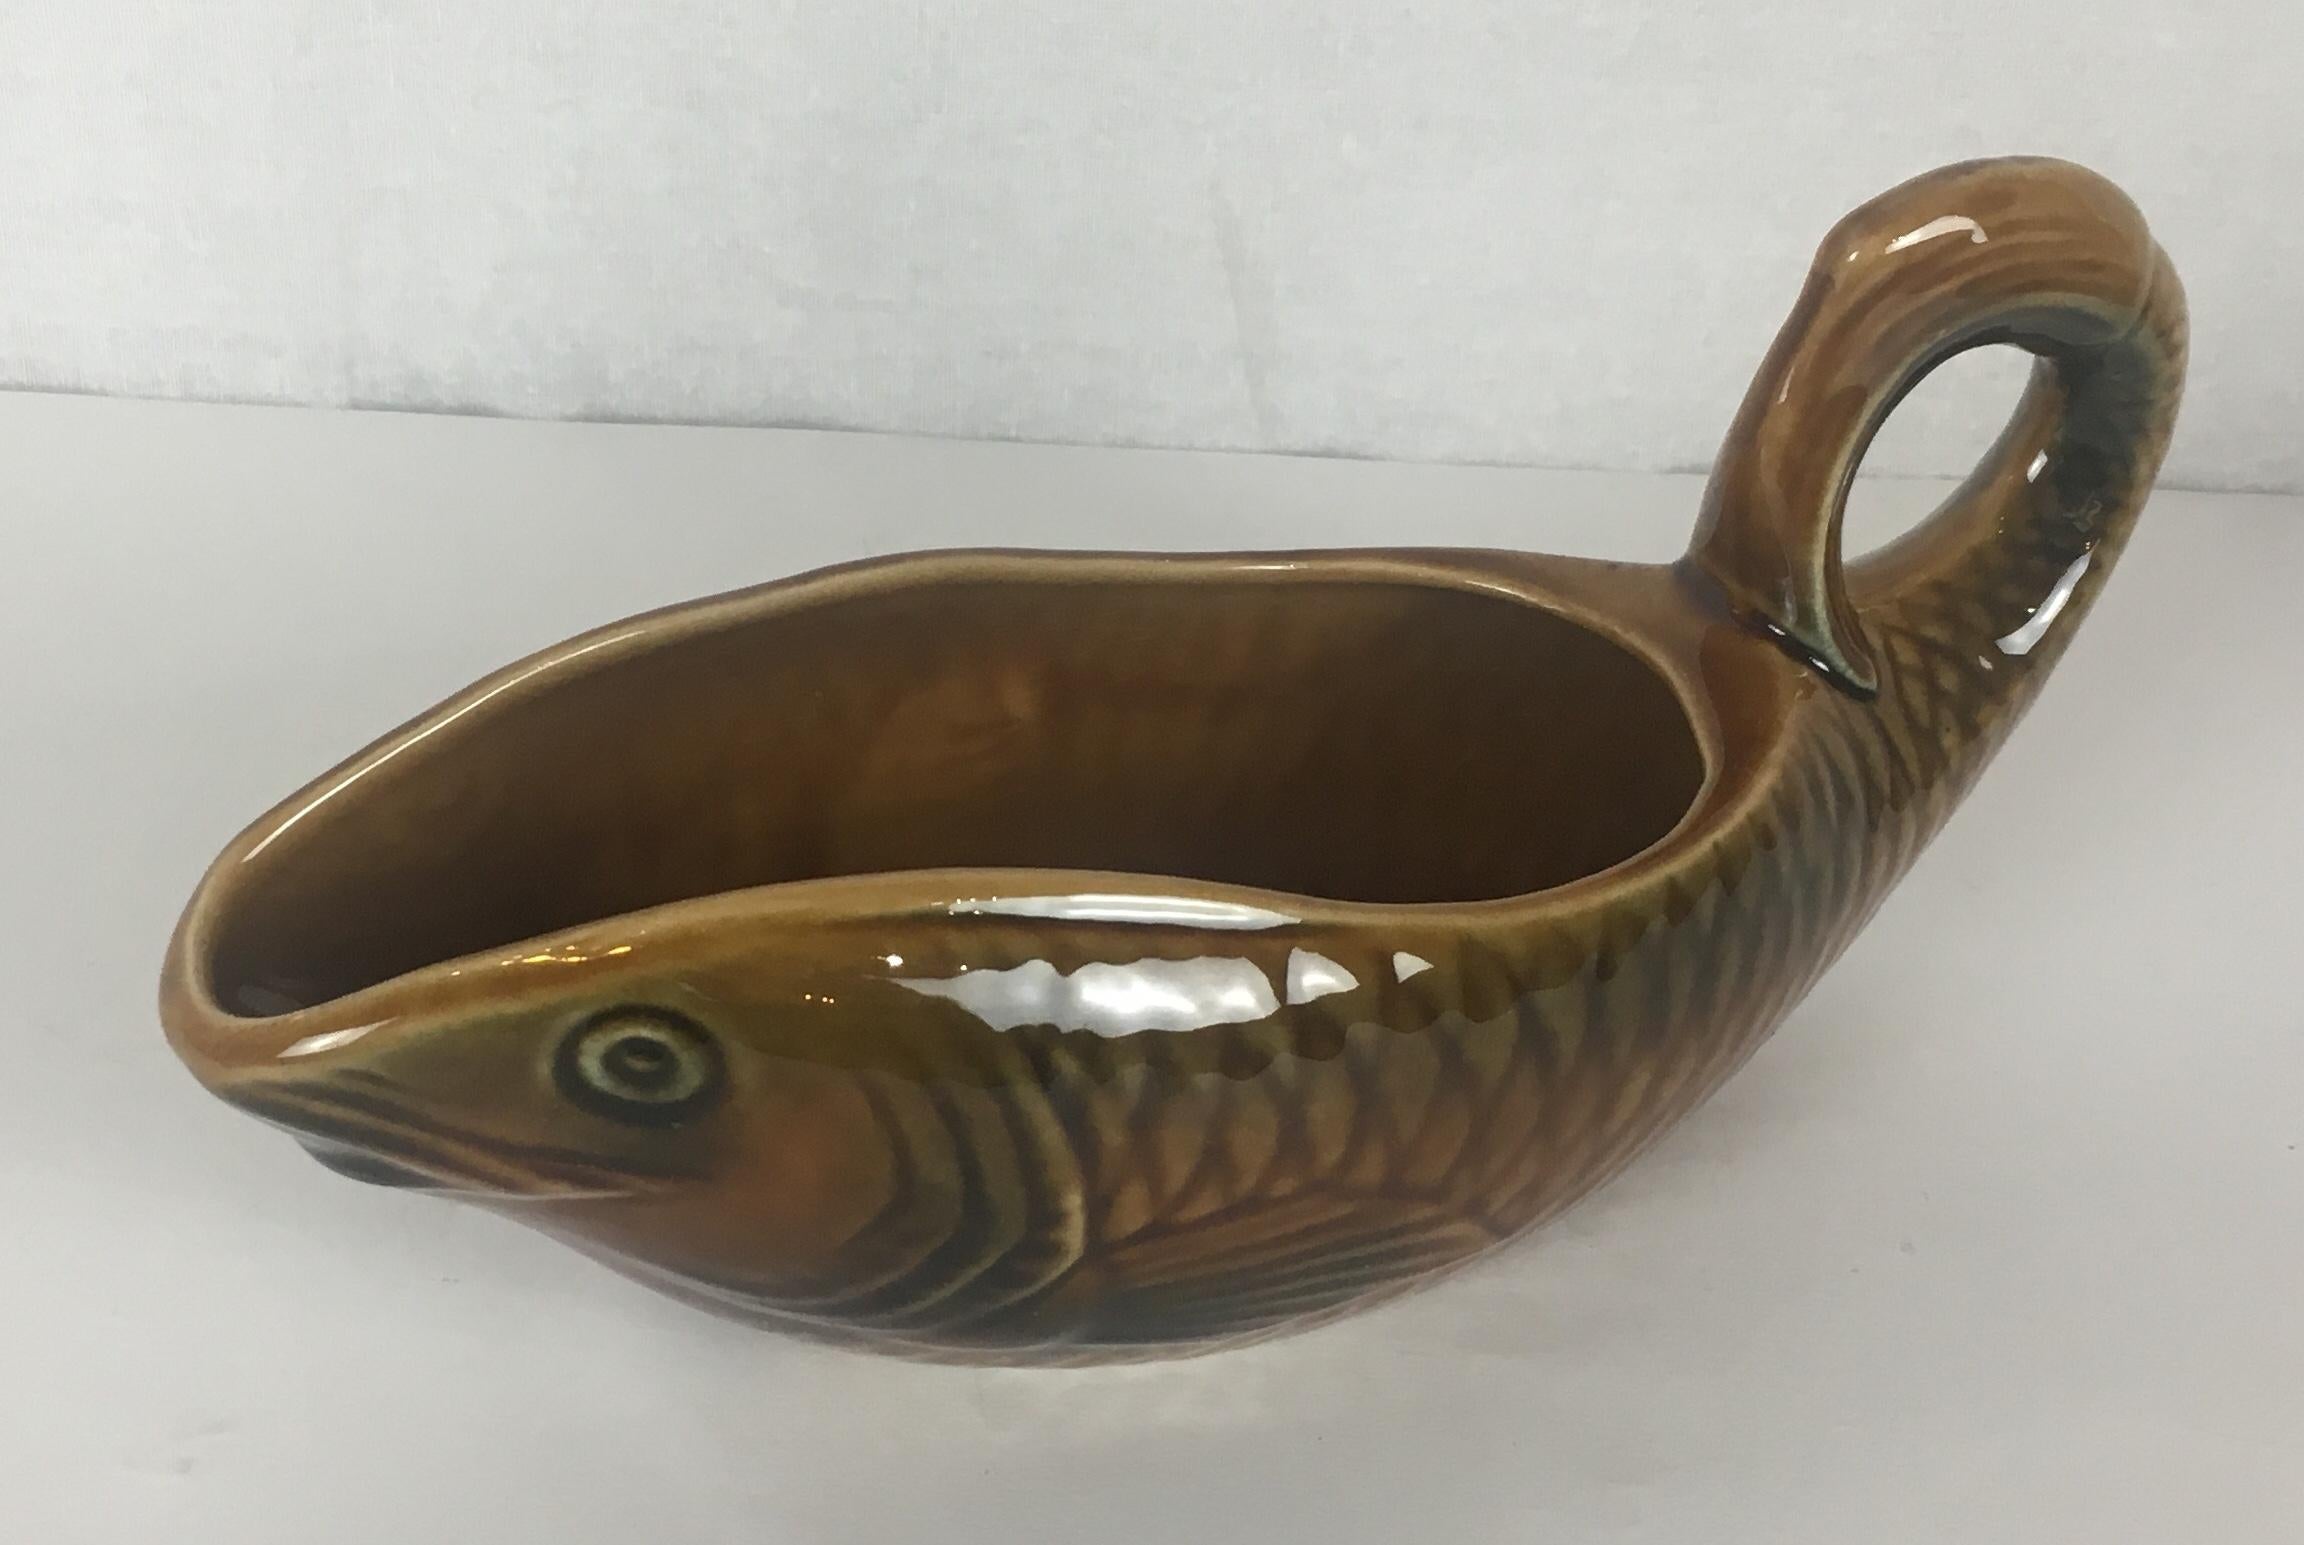 14 Piece Sarreguemines Majolica Fish Plates, Bowls, Soup Tureen and Sauce Boat For Sale 1